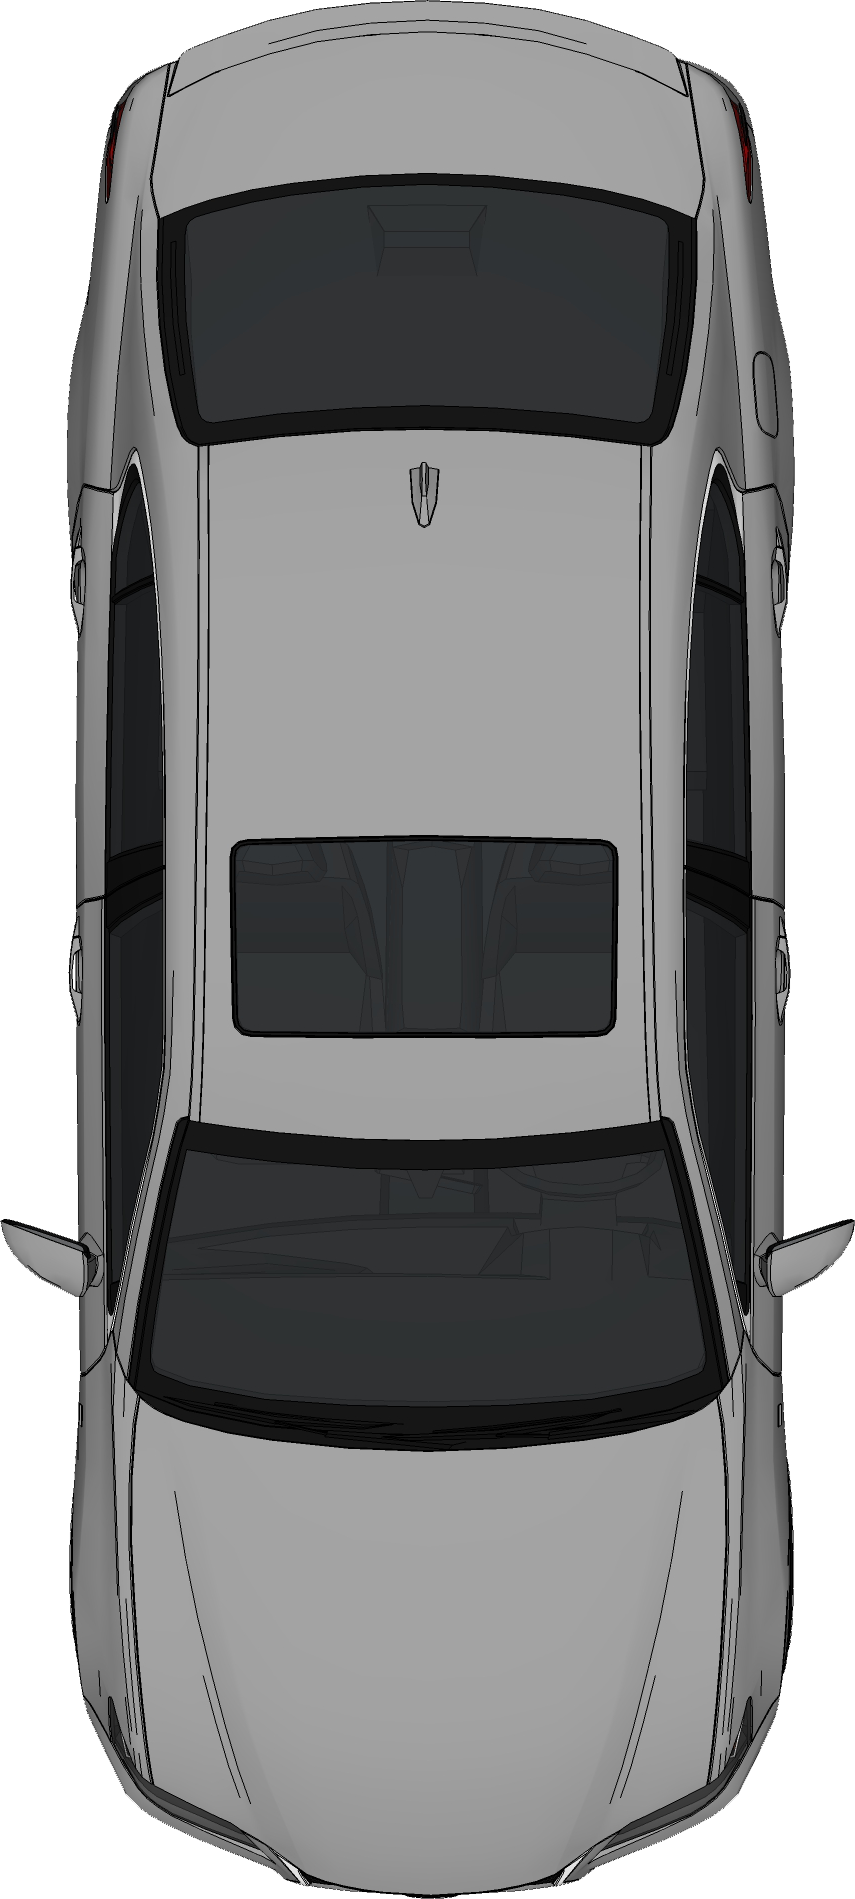 A Top View Of A Car